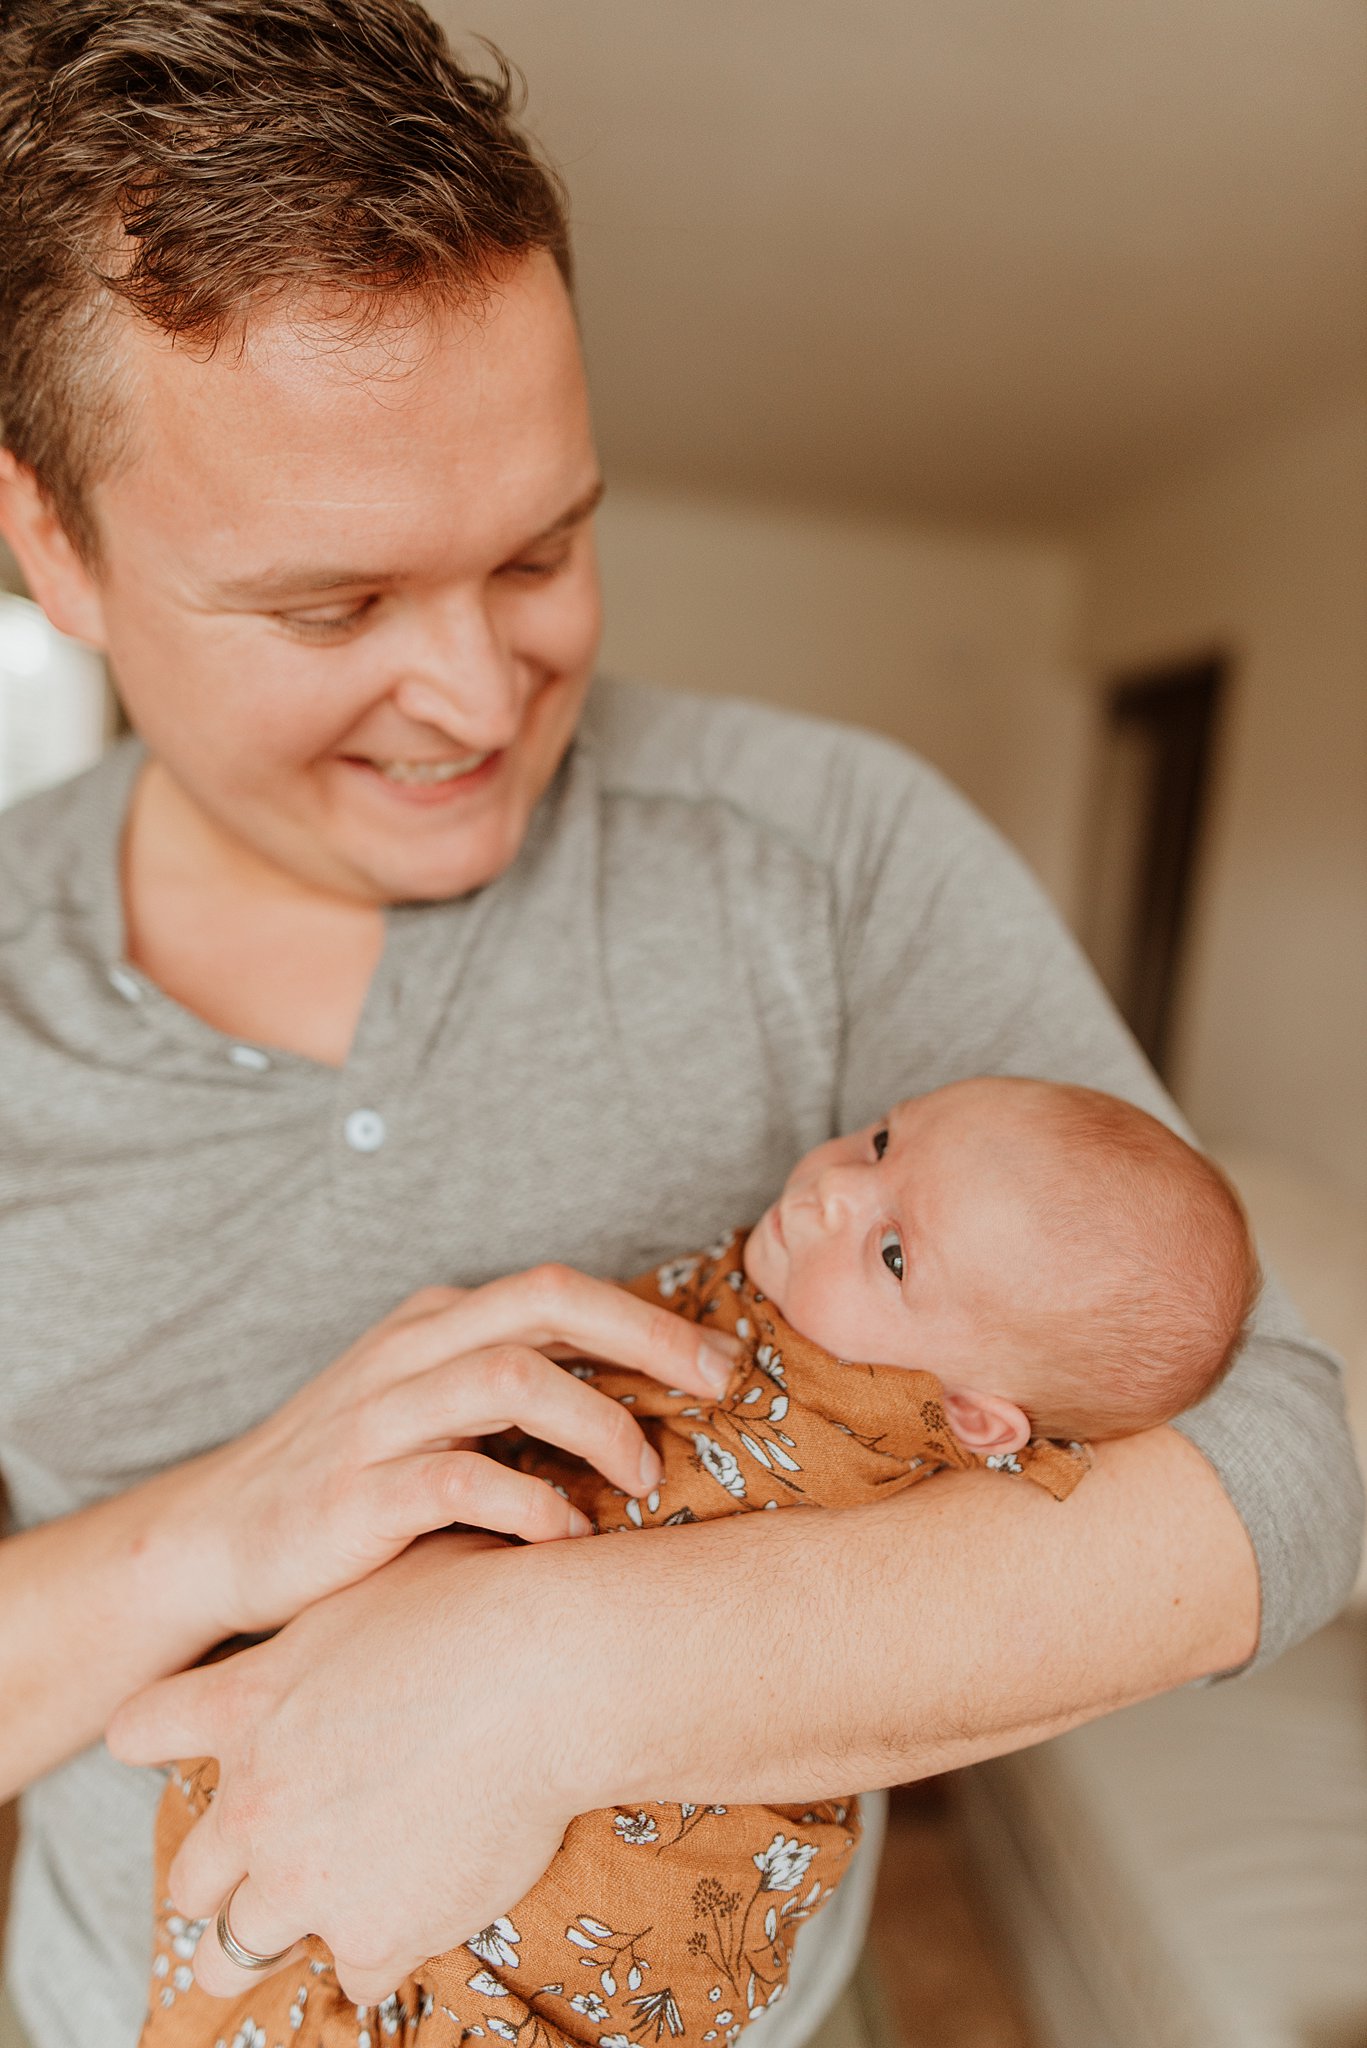 A happy father smiles while tickling his newborn baby in his arms after finding a vancouver diaper service